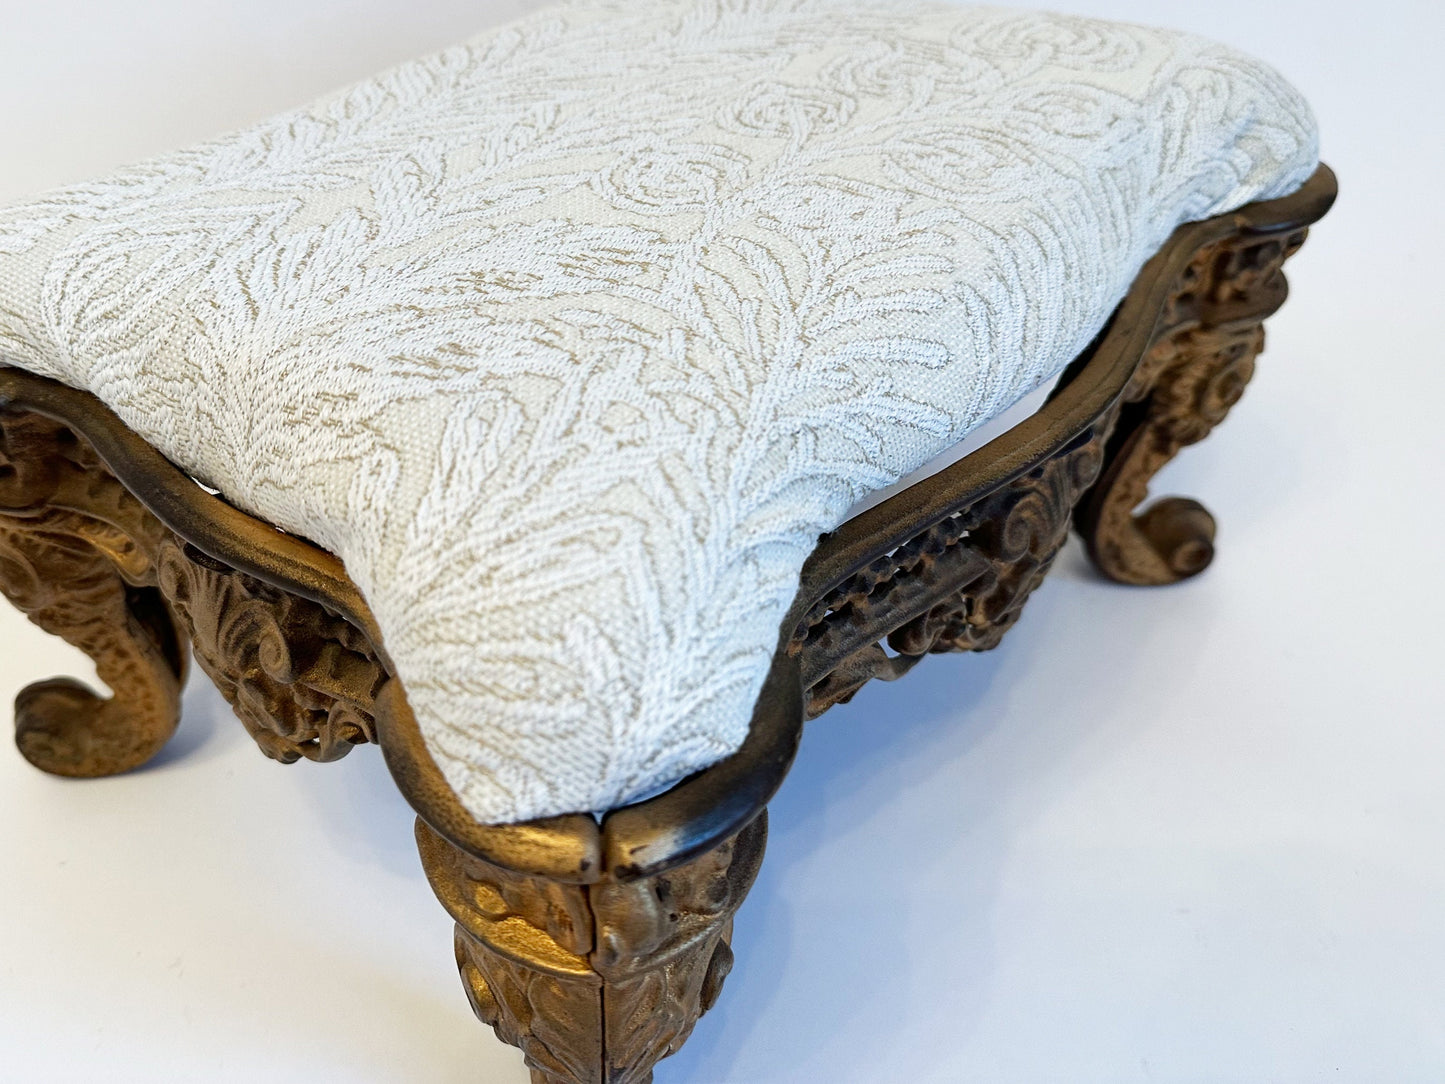 Vintage Footstool Cast Iron Foot Stool Ornate Victorian Louis XV Style Metal Ottoman Victorian Decor Botanical Upholstered Footrest